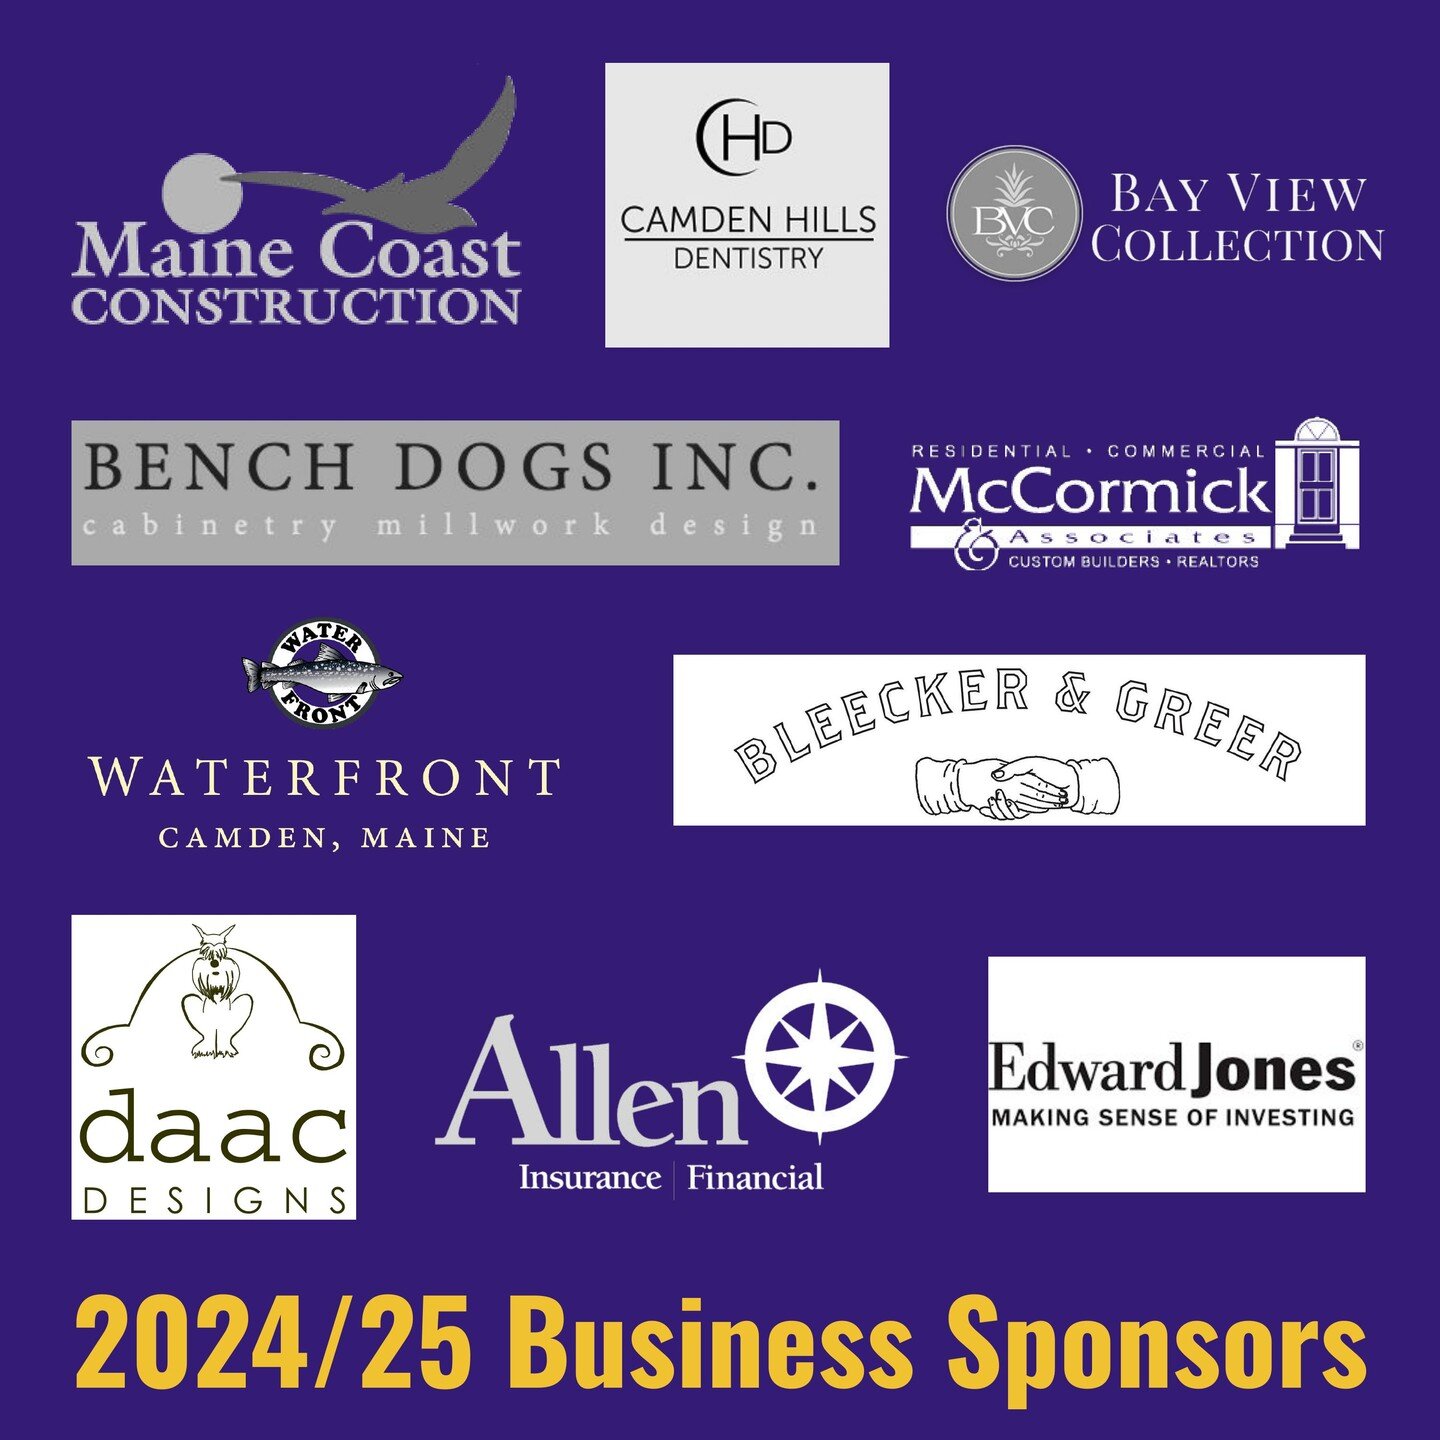 It's business sponsorship season at Bay Chamber and today we're highlighting a few of our amazing 2024-25 advertising sponsors! We're so grateful for our local businesses that contribute so meaningfully to the vitality of our community! 

Visit baych